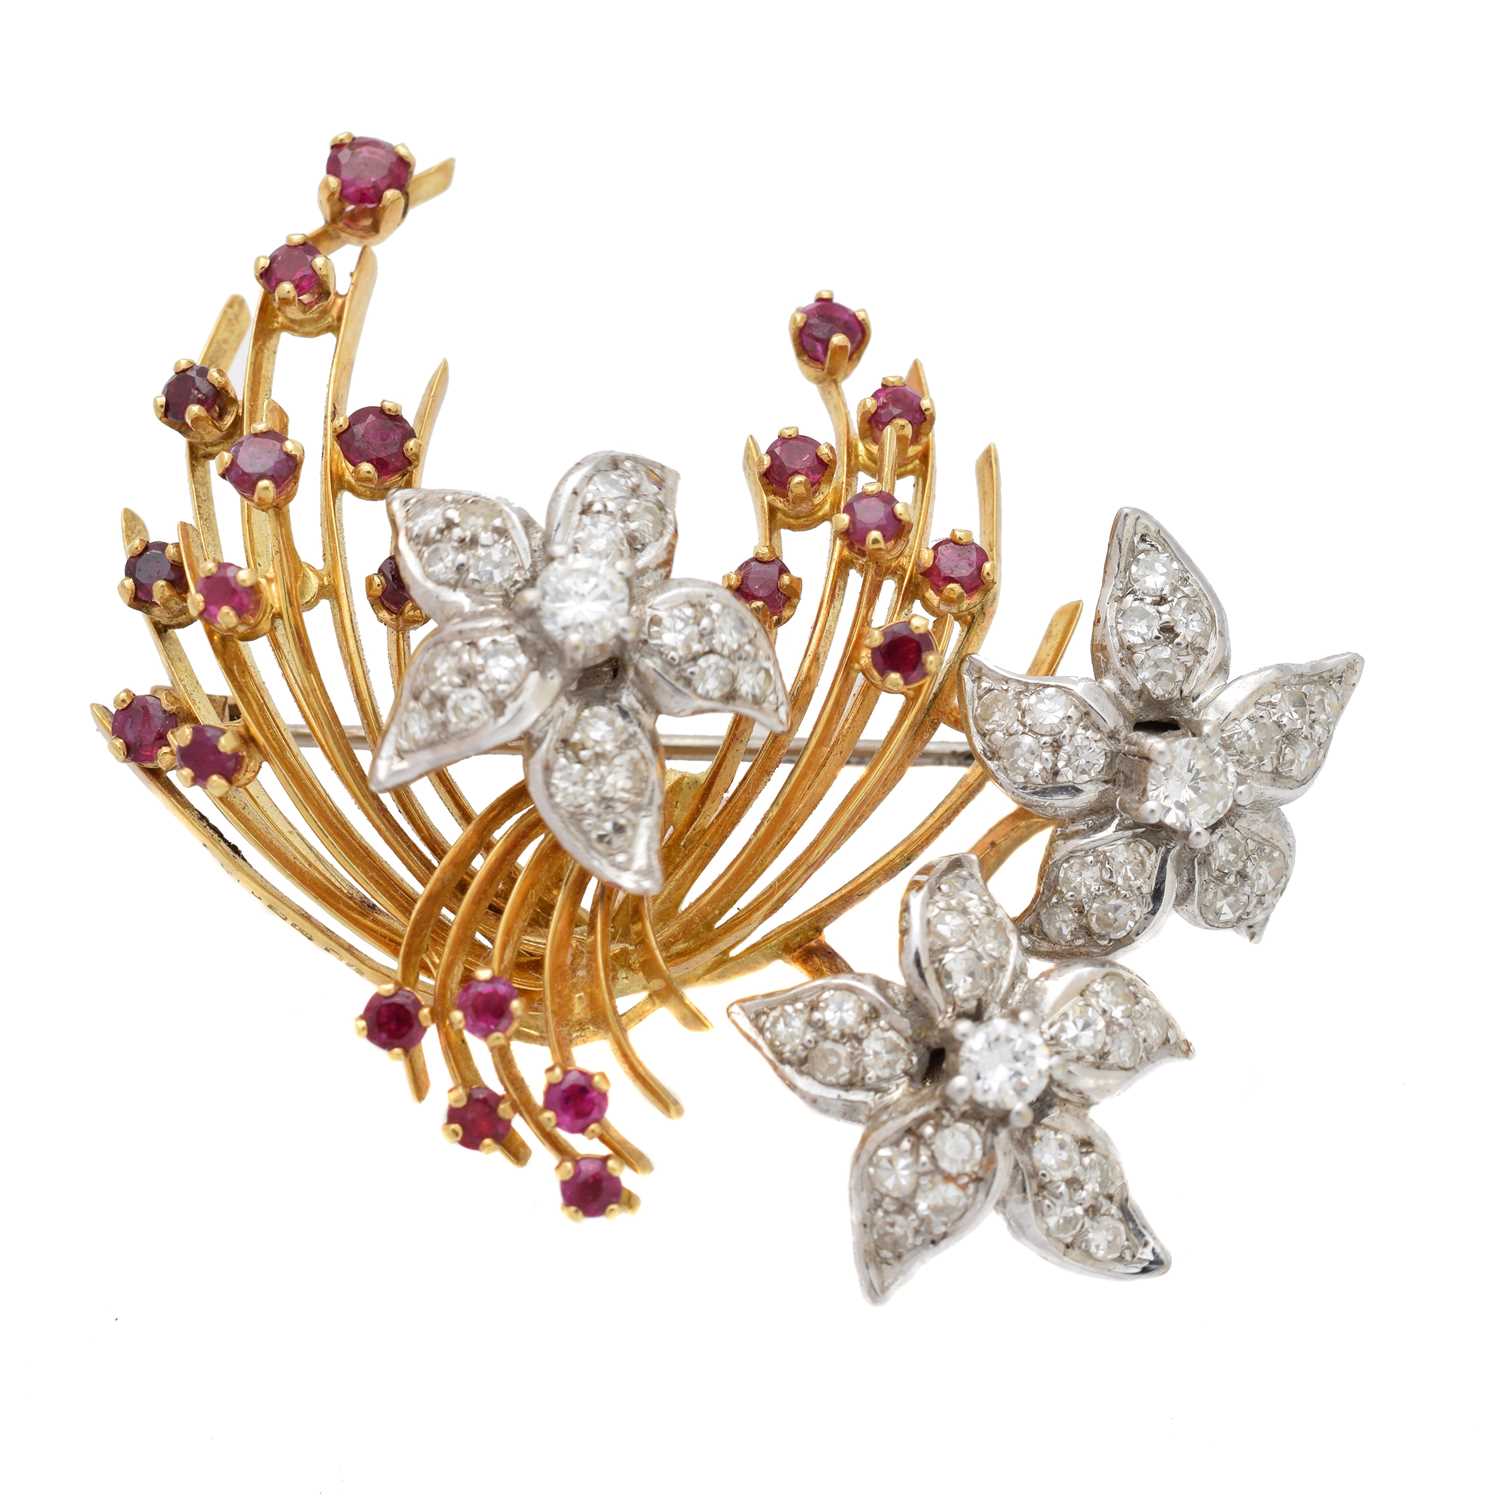 Lot 59 - A 1960s 18ct gold diamond and ruby brooch by Ben Rosenfeld